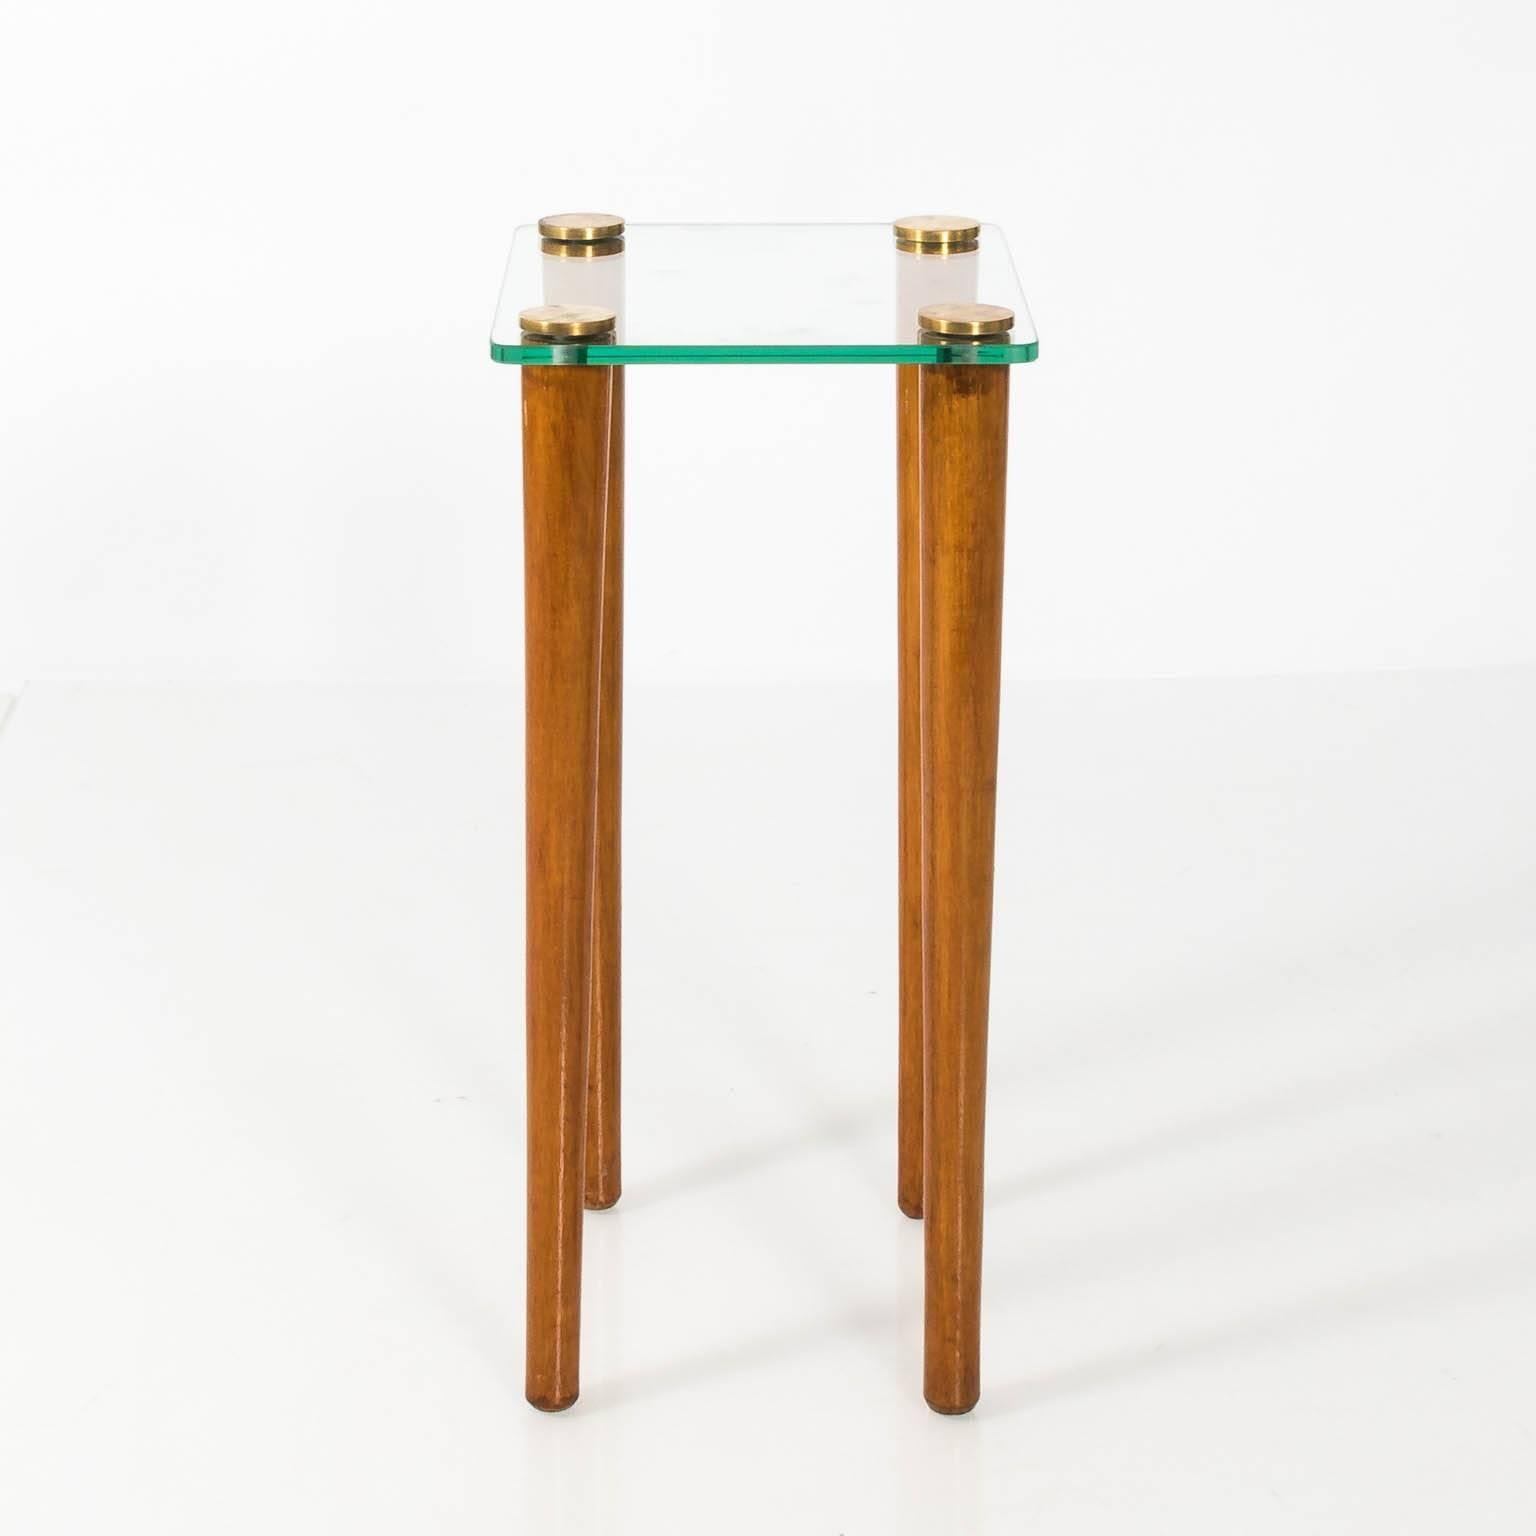 Set of three Mid-Century Modern style glass and wood nesting tables by Gilbert Rohde, circa 1950. The largest table measures: 14.00 inches wide by 24.00 inches height by 24.00 inches depth; the middle table measures 19.00 inches wide by 23.00 inches